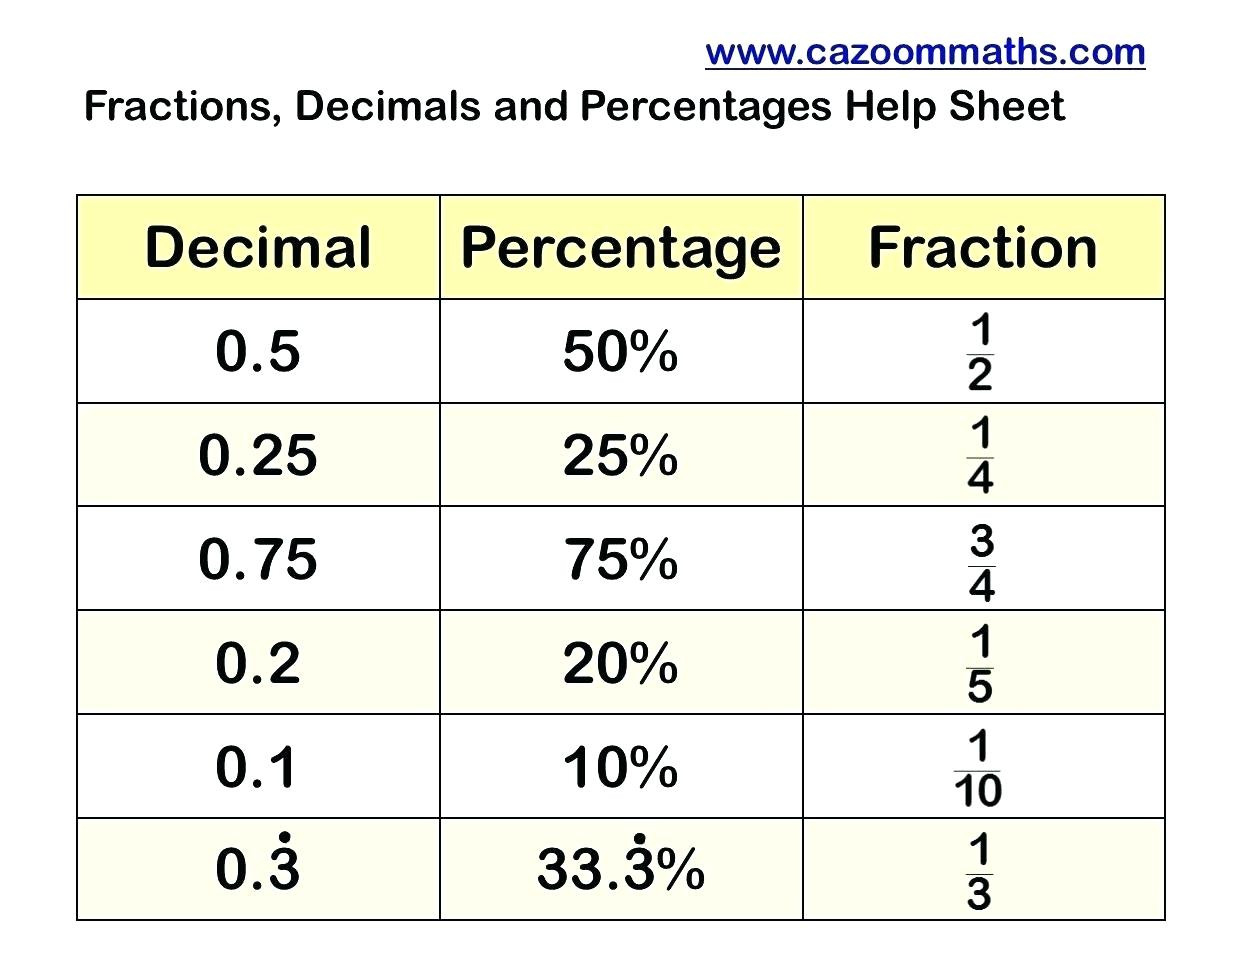 calculating fractions to percentages